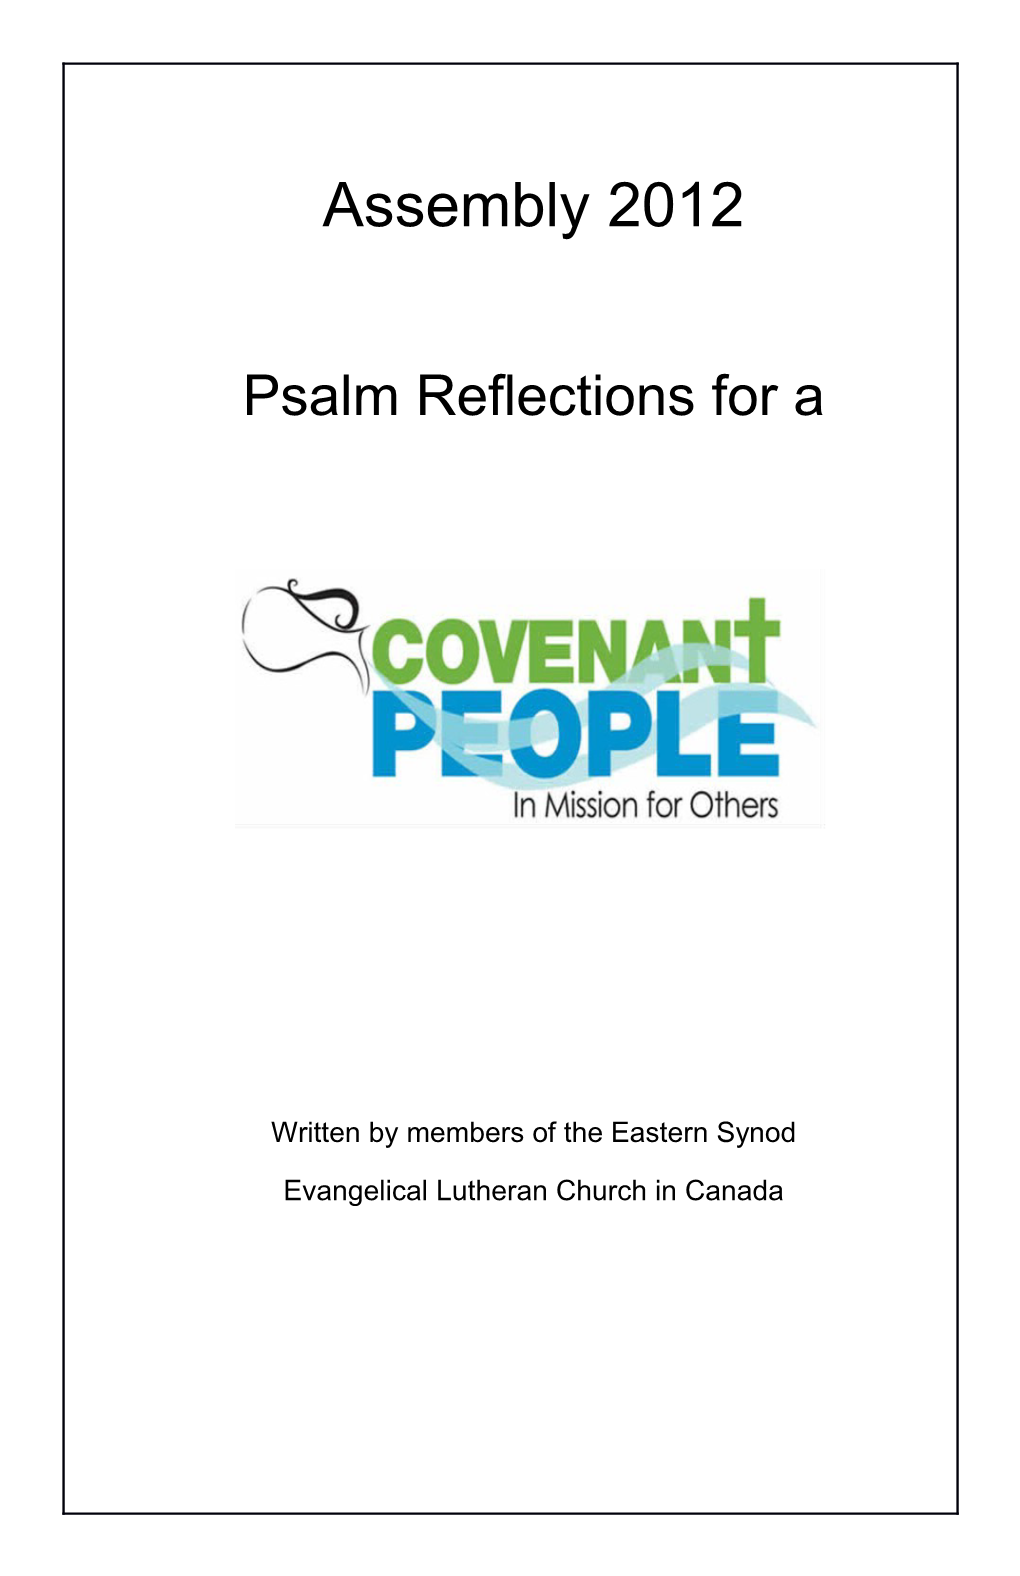 Written by Members of the Eastern Synod